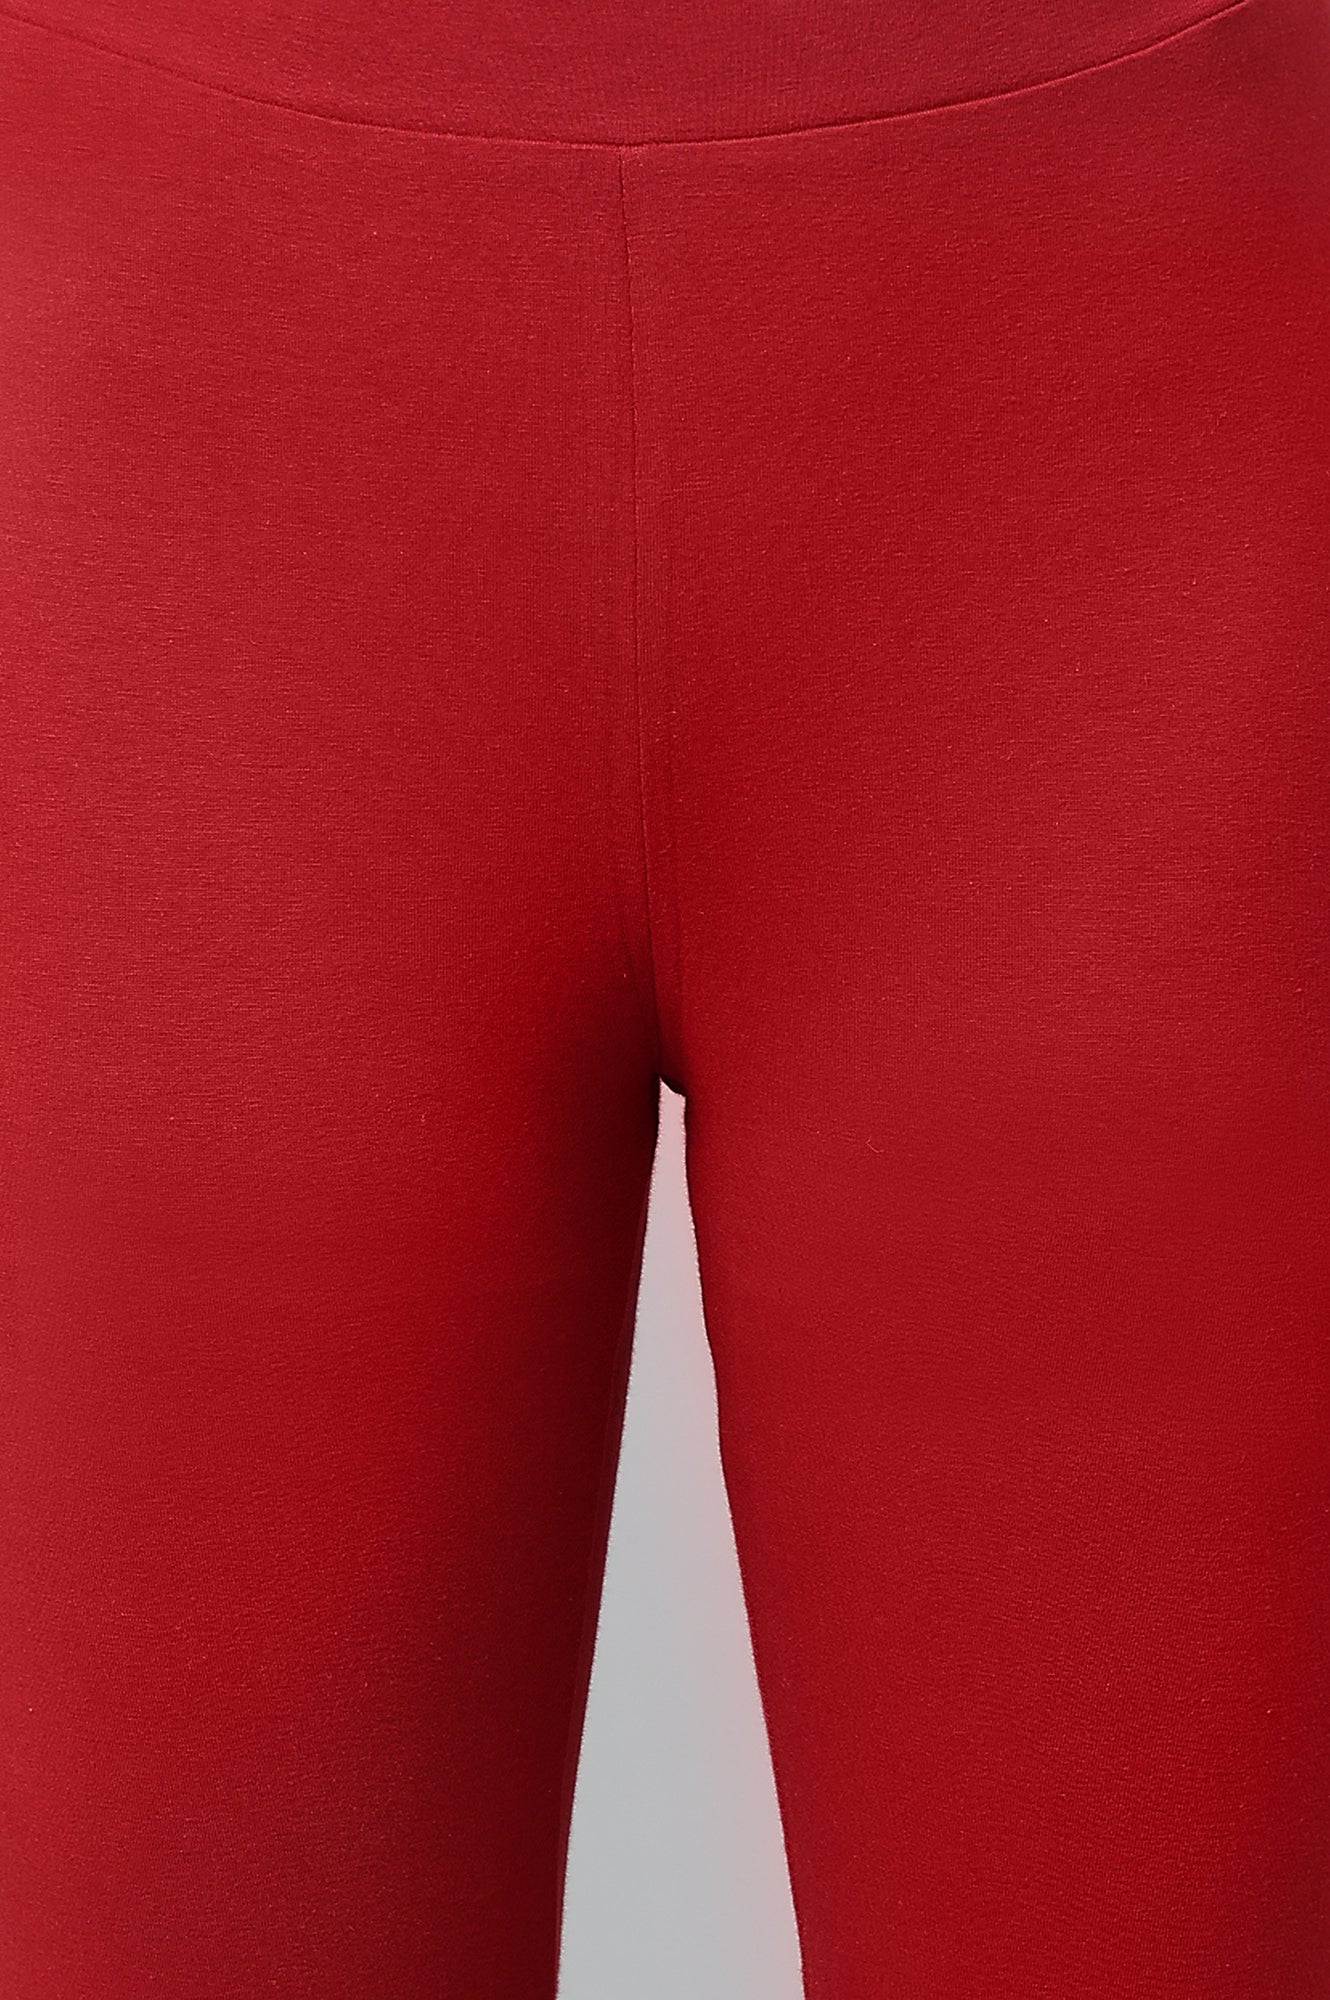 Red Knitted Cotton Lycra Tights